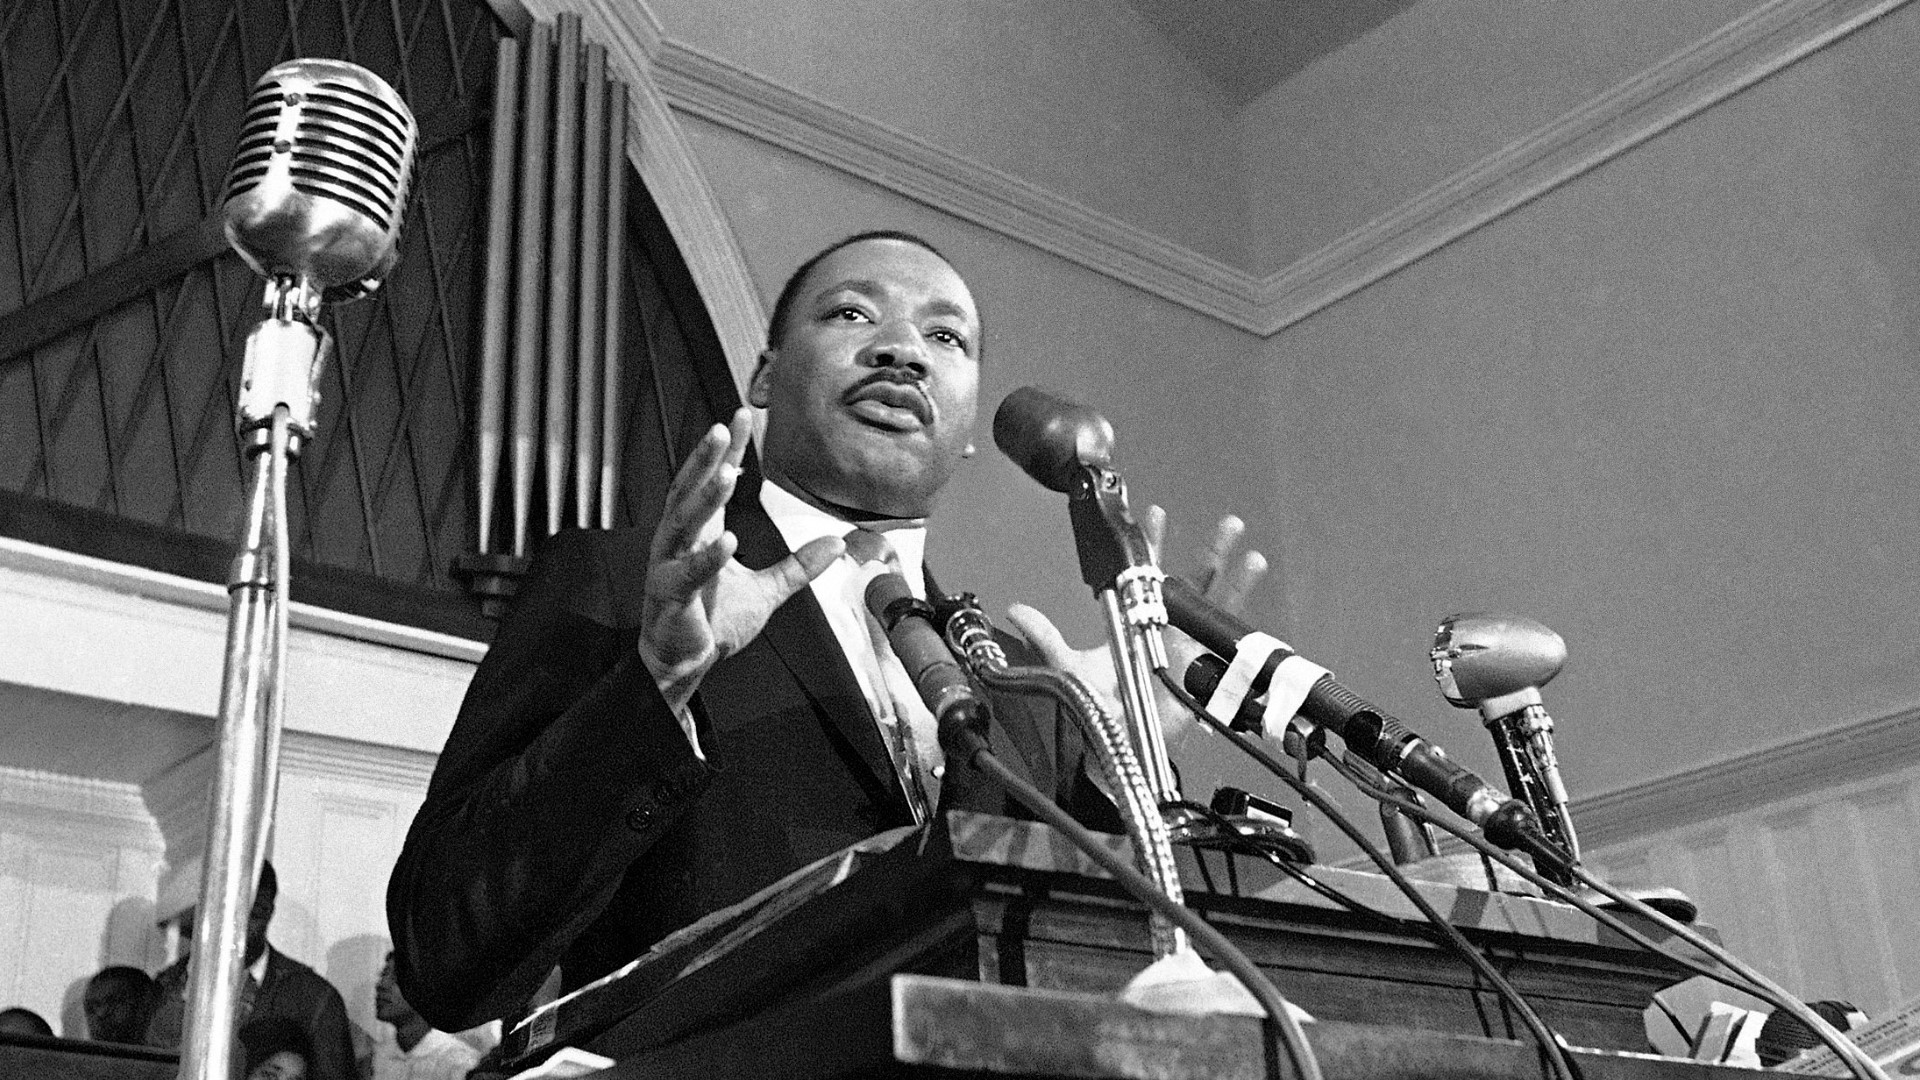 Martin Luther King, Jr. was born in Atlanta on Jan. 15 in 1929